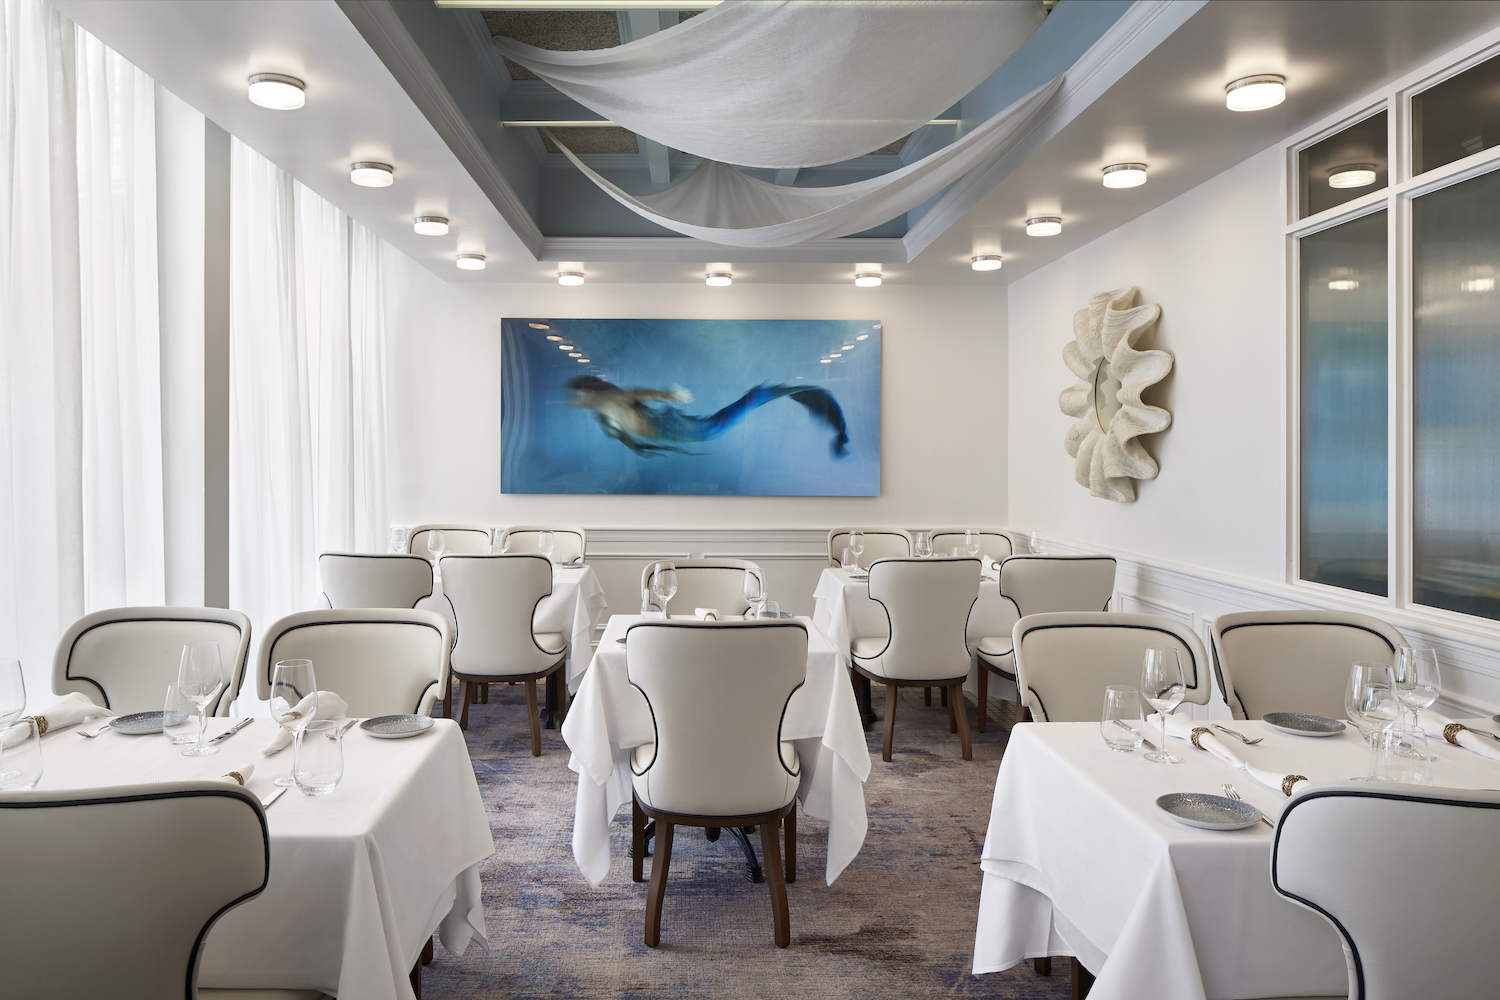 White accented dining area with tables, couch chairs and a mermaid painting on the wall